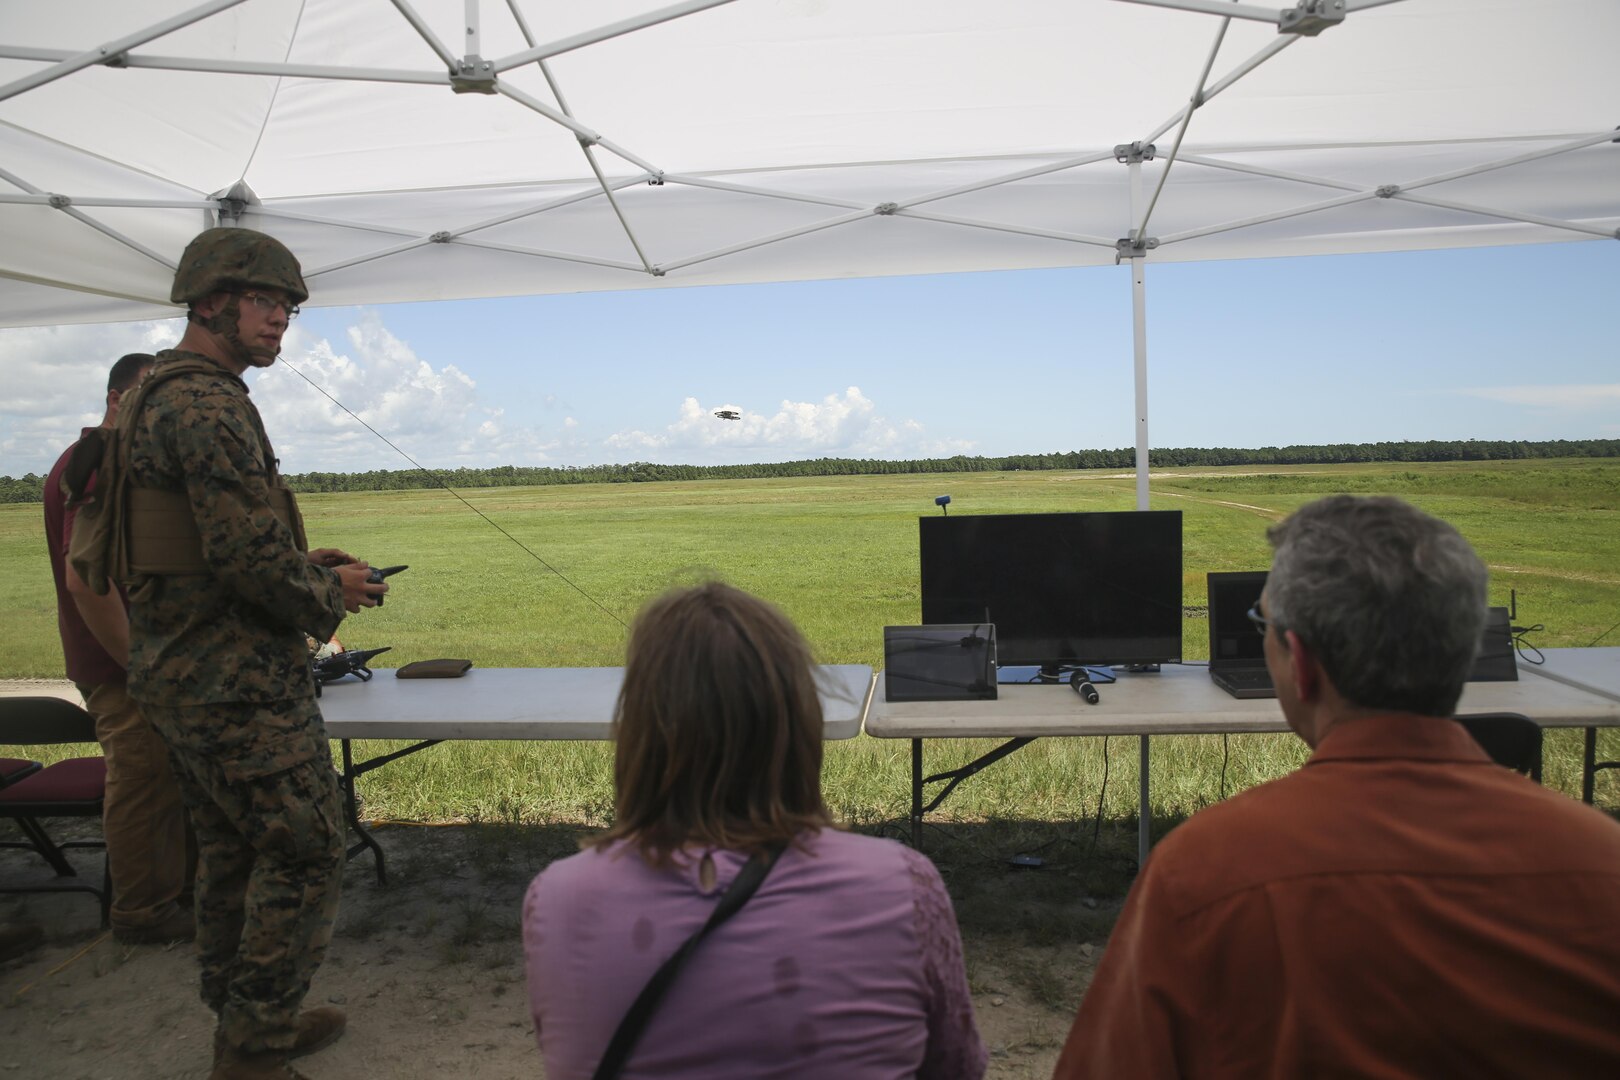 Lance Cpl. Zachary Black, left, a Joint Tactical Aerial Resupply Vehicle operator with Combat Logistics Regiment 25, demonstrates the capabilities of the JTARV to distinguished visitors from the Department of Defense at Camp Lejeune, N.C., Aug. 17. Technological advancements such as the JTARV can potentially allow for safer and quicker resupply missions as opposed to vehicle convoys or piloted aircraft, helping to preserve resources and save lives on the battlefield. (U.S. Marine Corps photo by Sgt. Lucas Hopkins)